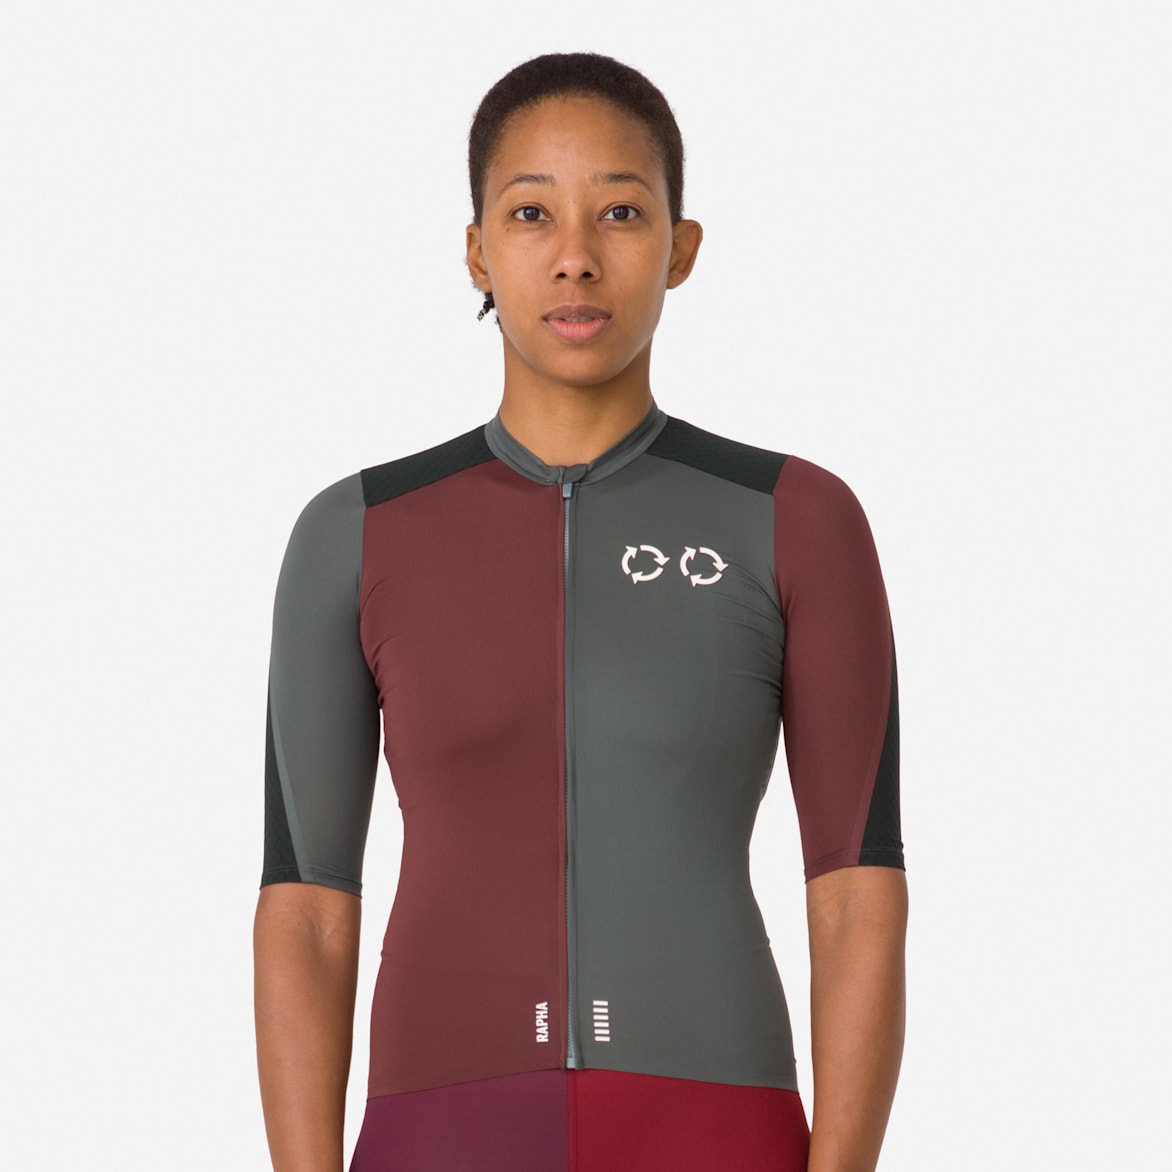 Womens Cycling Jerseys - Our Best All-Conditions Fabric Technology